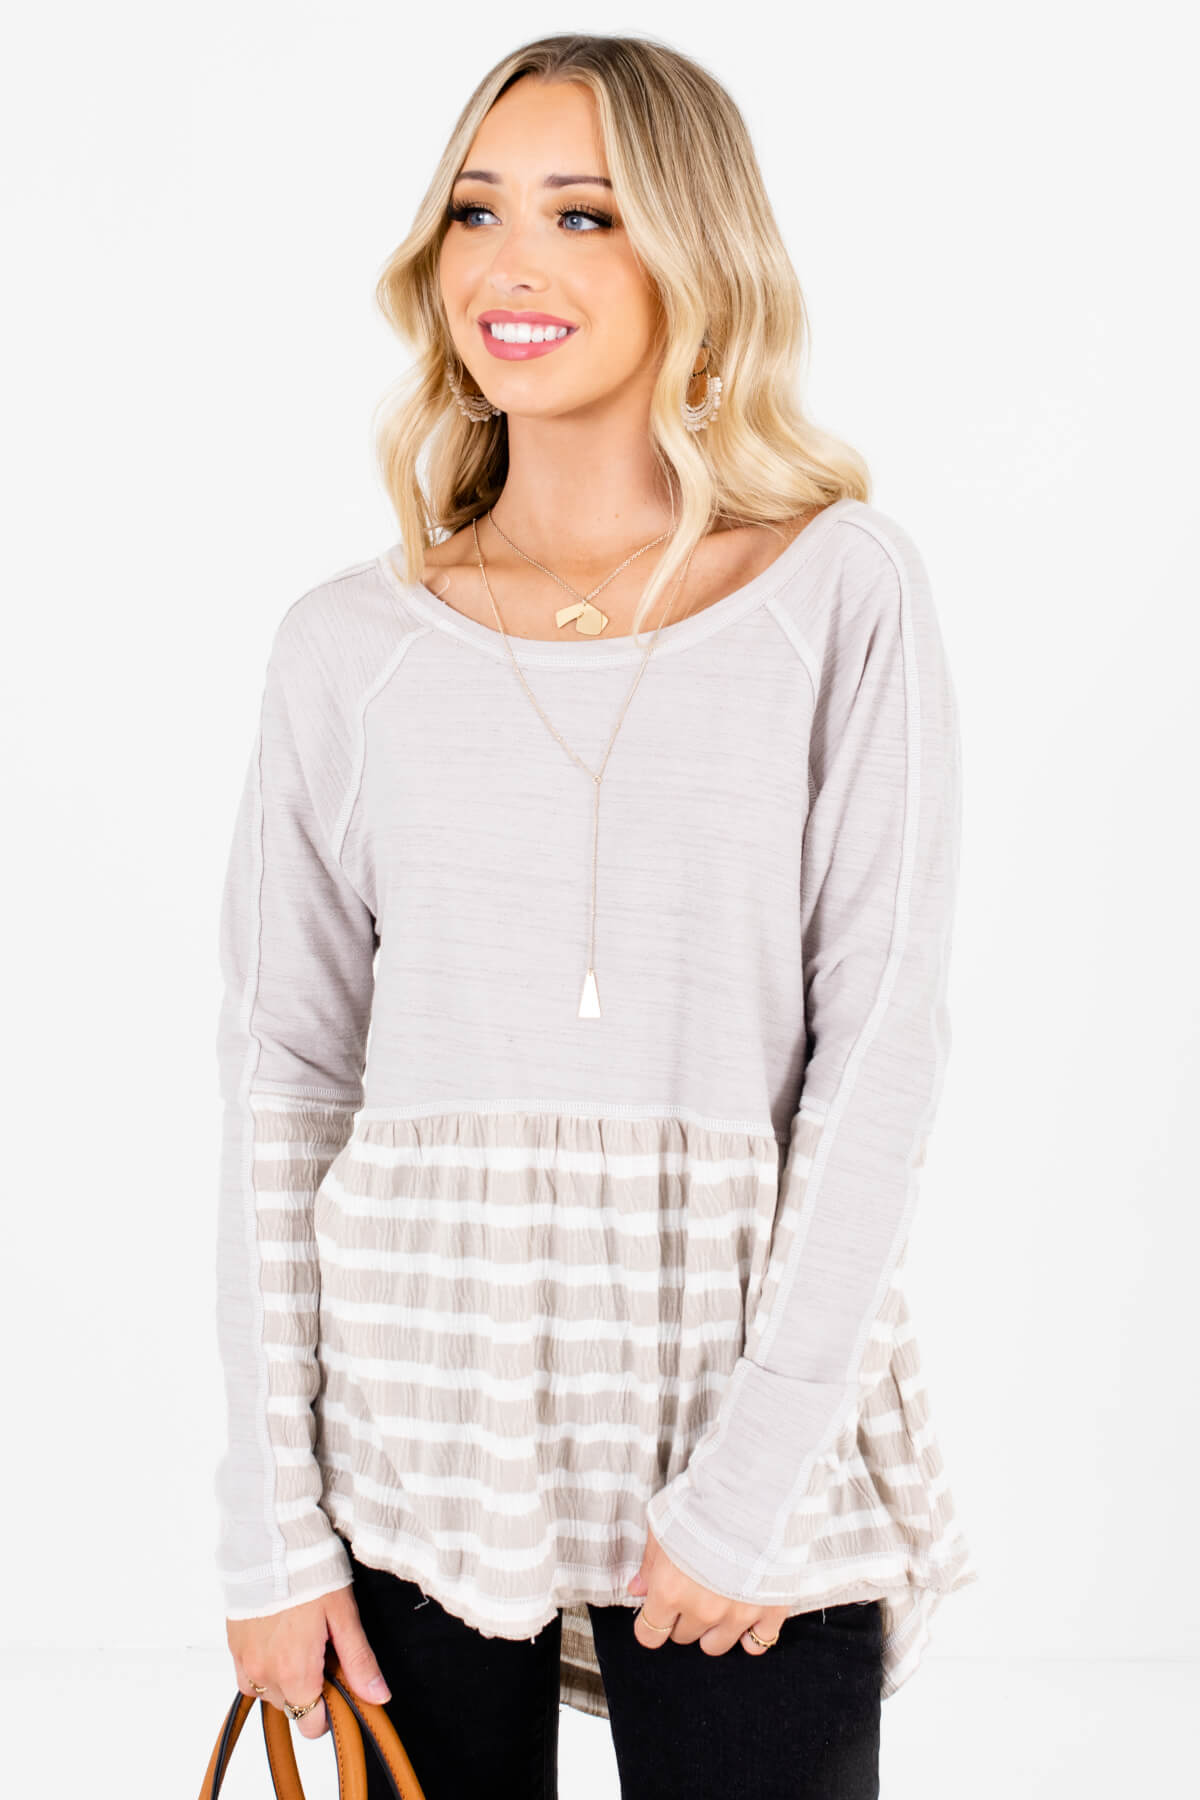 Women's Taupe Brown High-Low Hem Boutique Tops